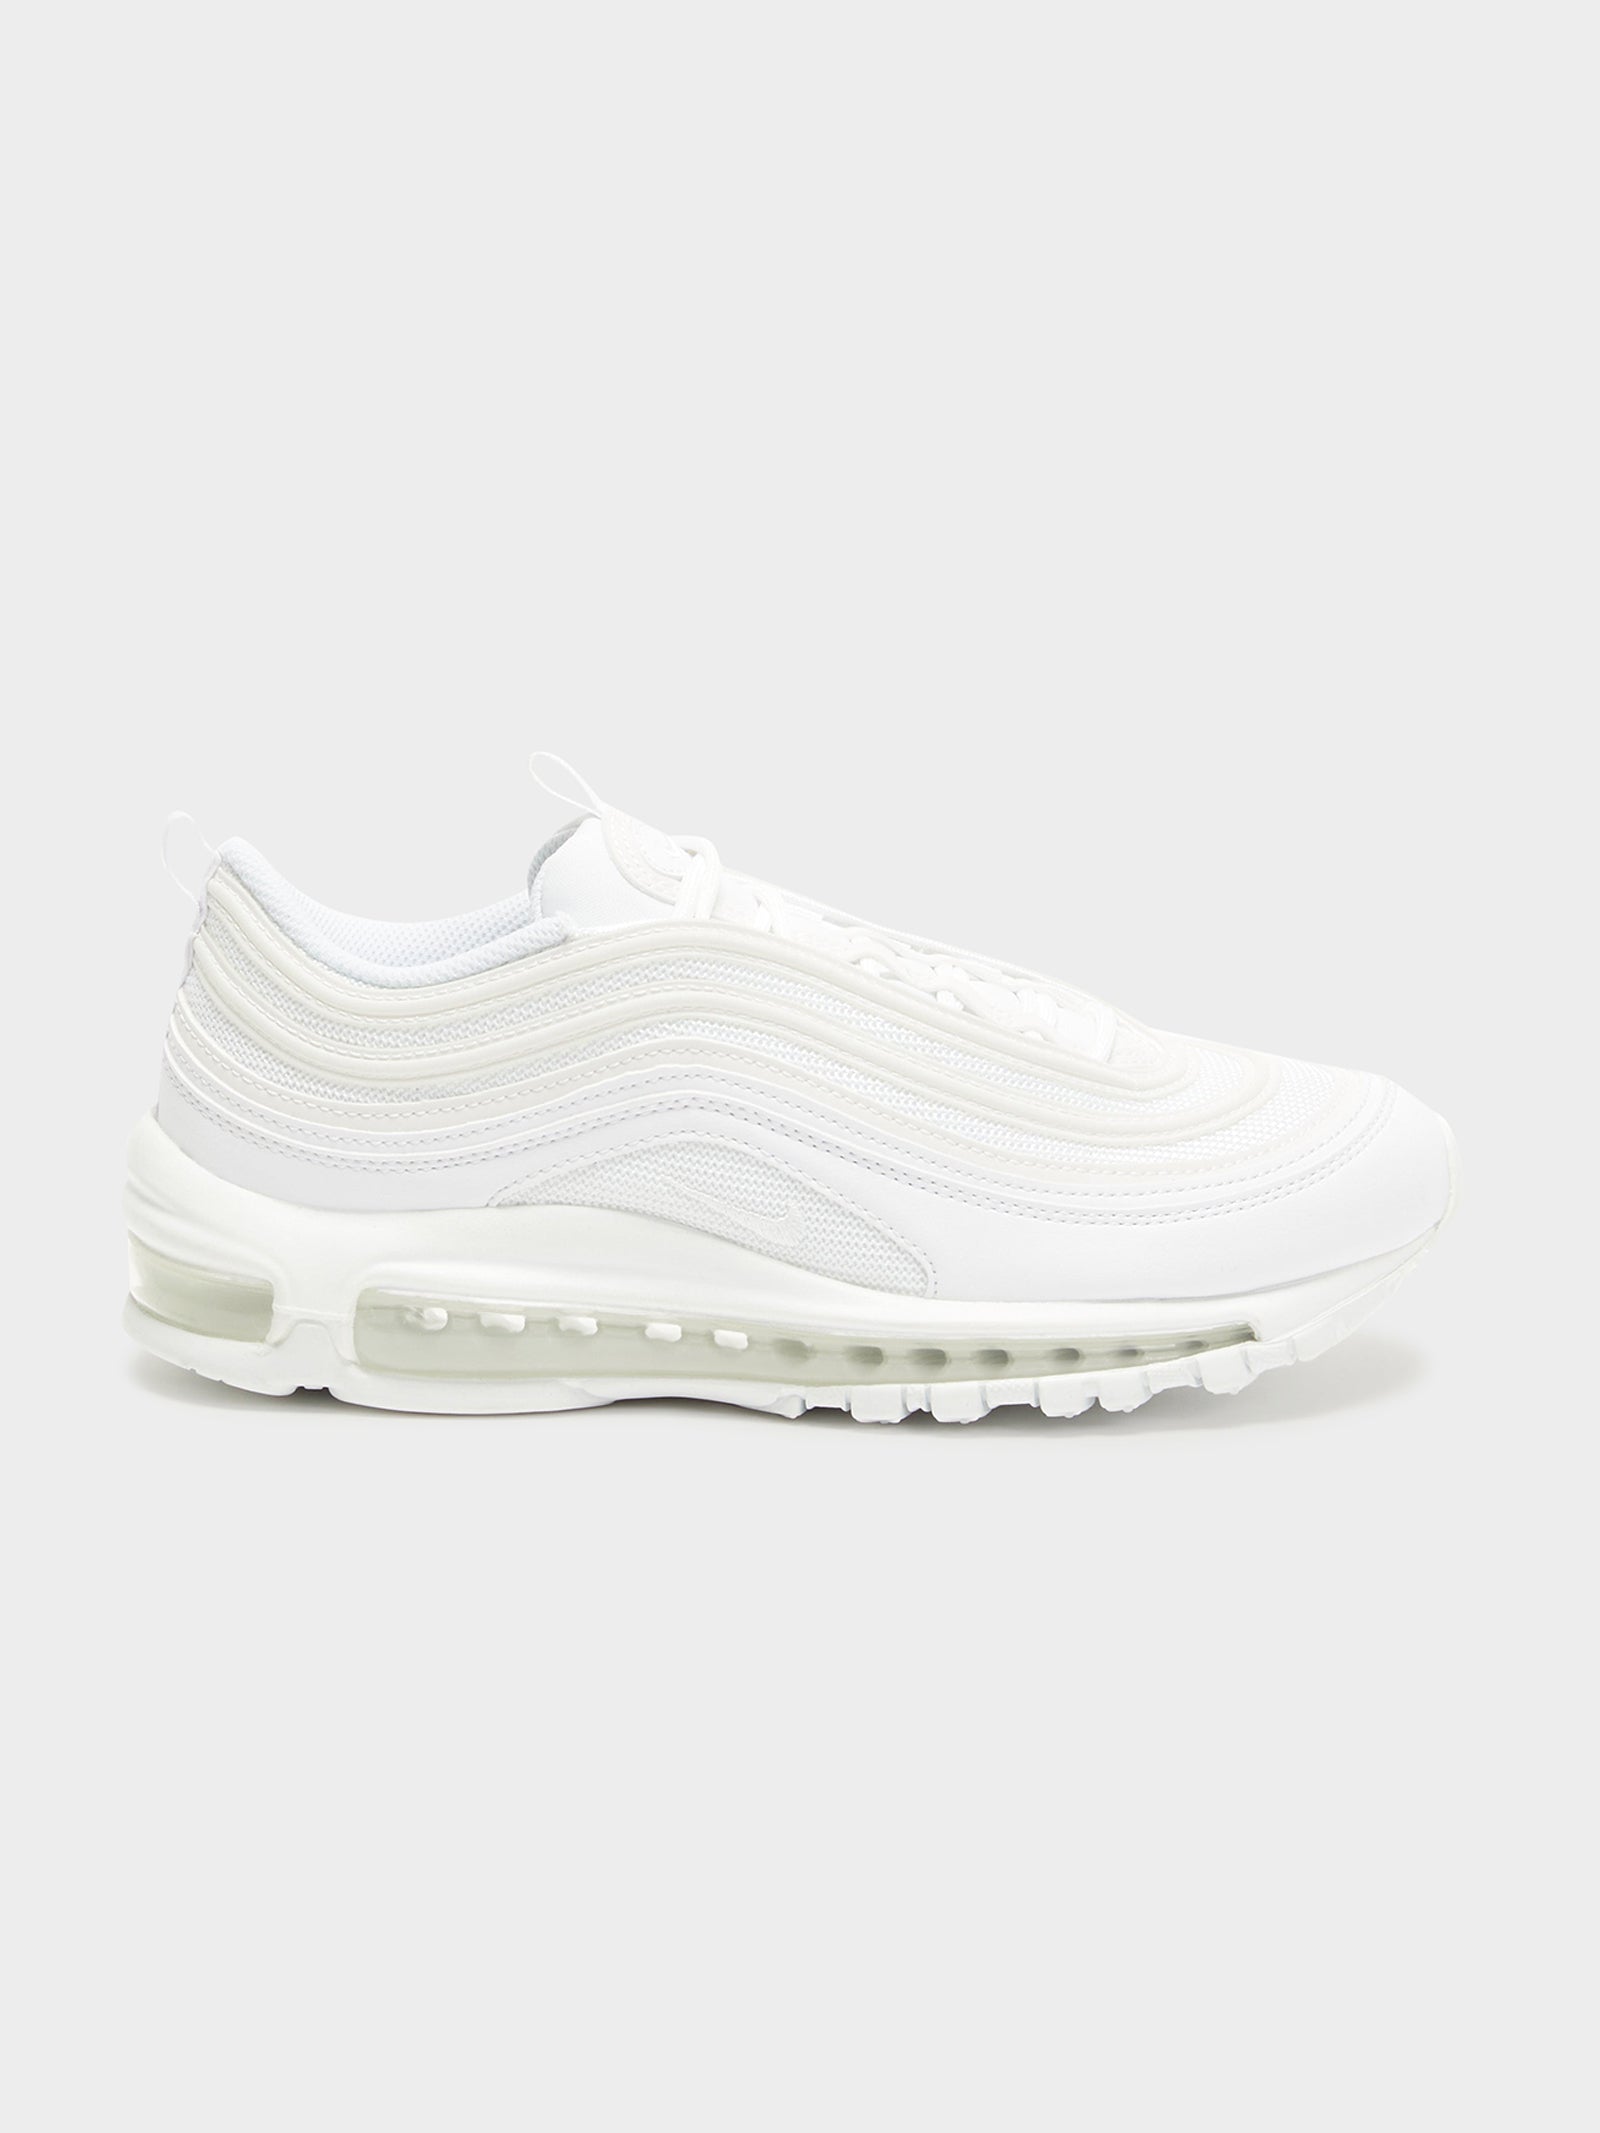 Womens Air Max 97 Sneakers in White